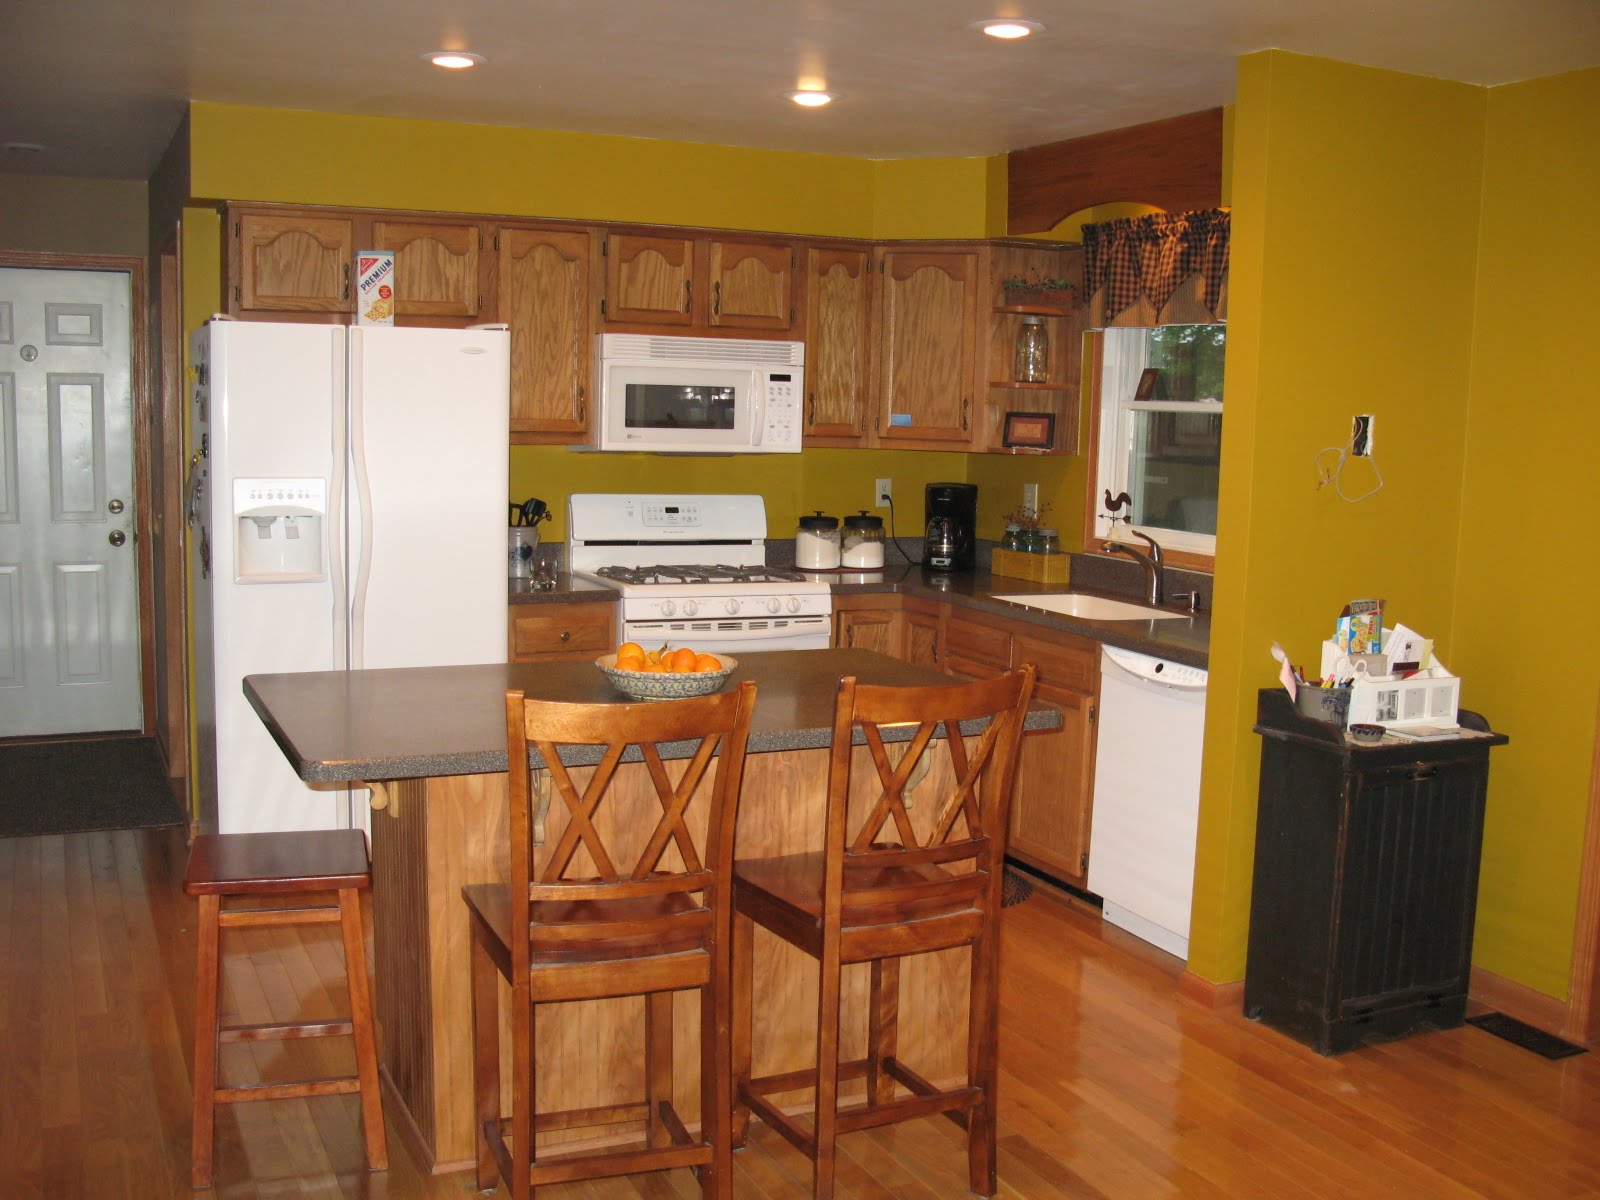 Great Paint Colors For Kitchens With Golden Oak Cabinets